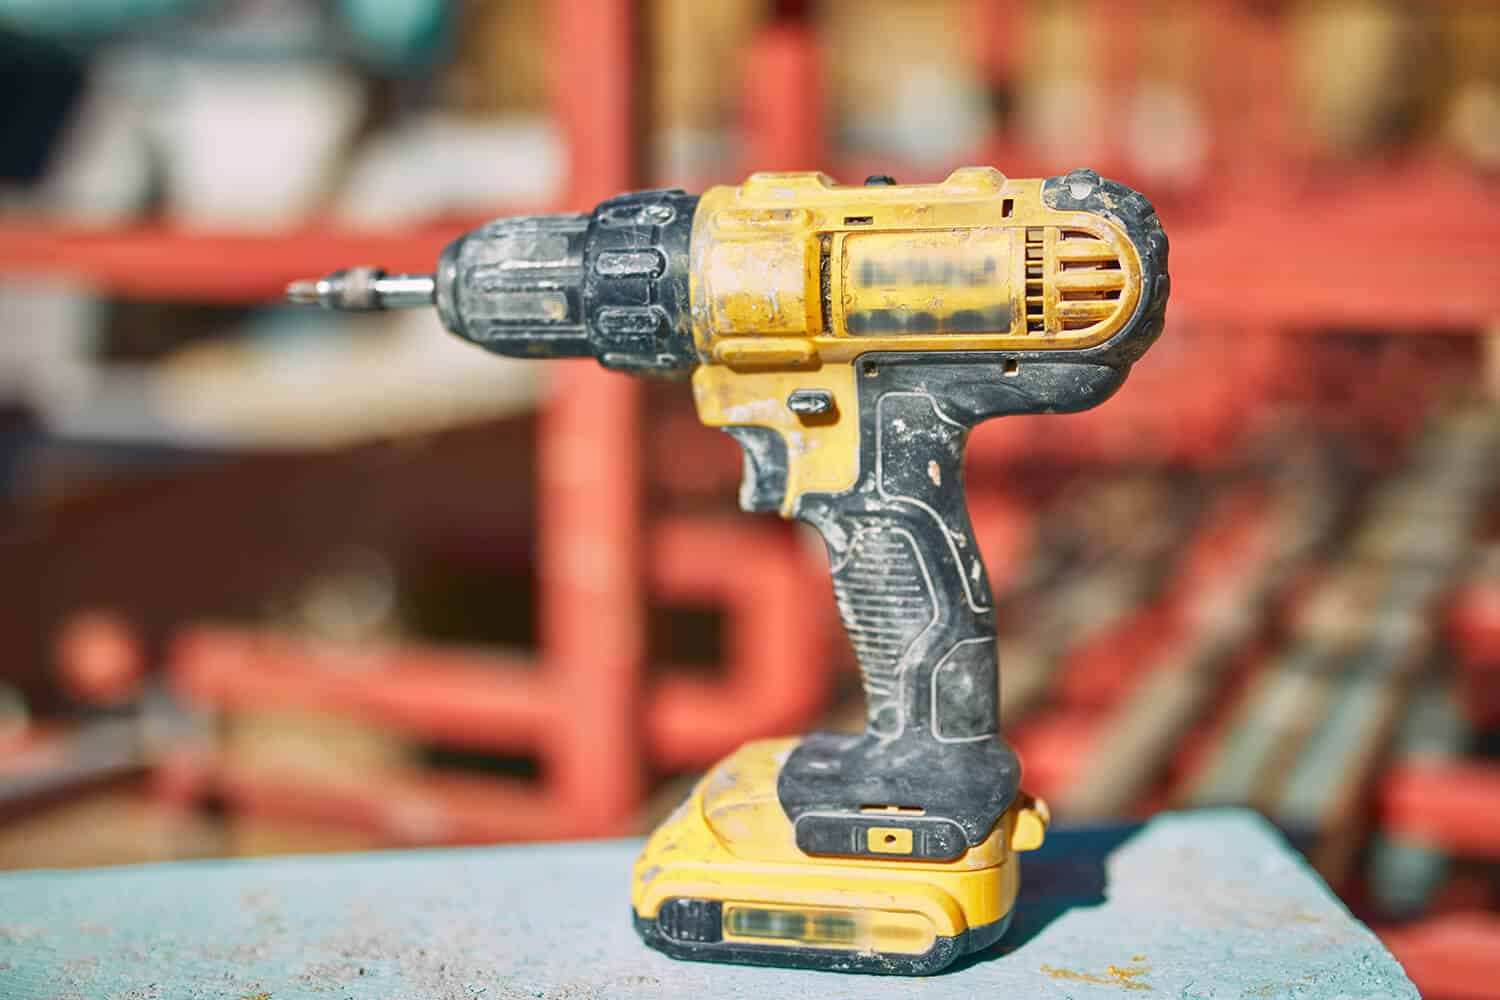 What To Do With An Old Cordless Drill